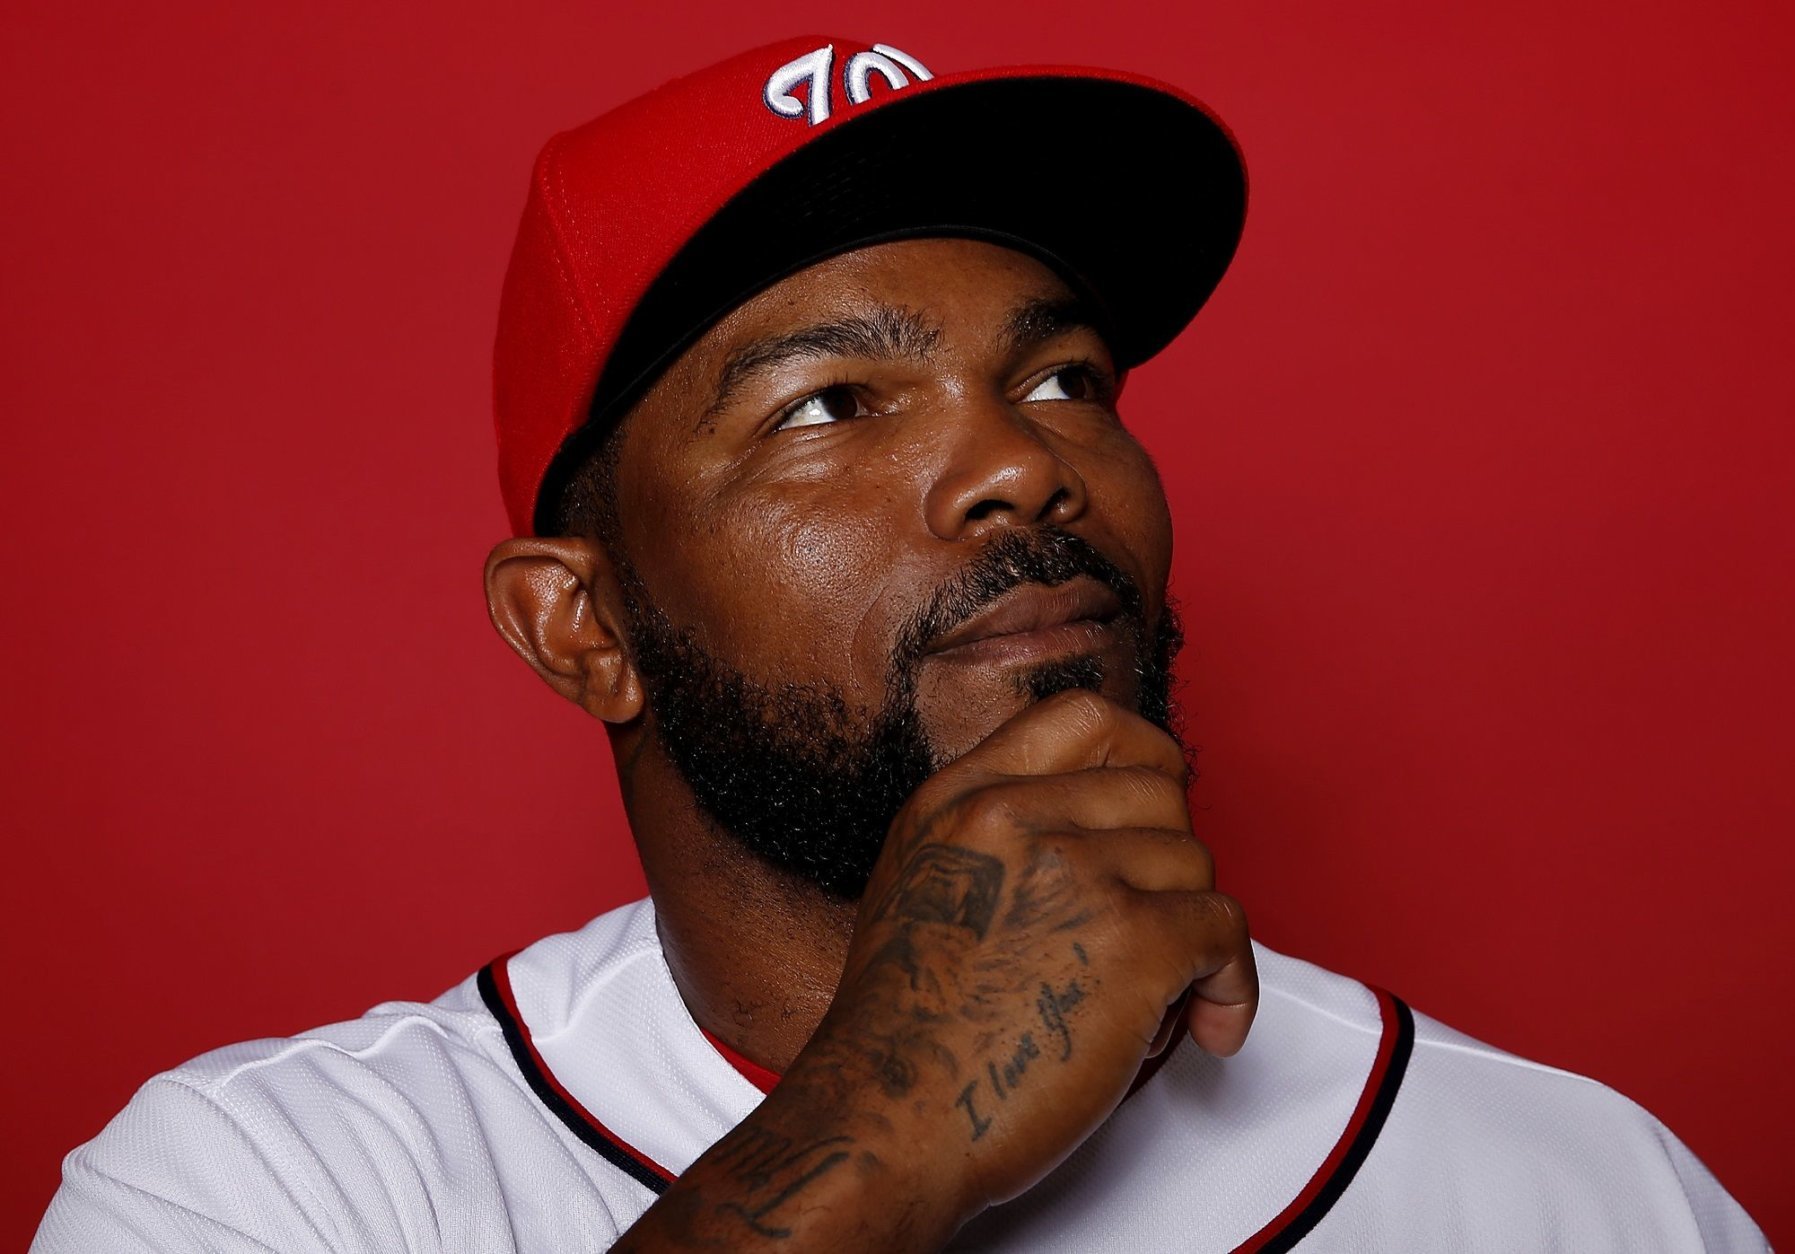 WEST PALM BEACH, FLORIDA - FEBRUARY 22:  Howie Kendrick #47 of the Washington Nationals poses for a portrait on Photo Day at FITTEAM Ballpark of The Palm Beaches during on February 22, 2019 in West Palm Beach, Florida. (Photo by Michael Reaves/Getty Images)